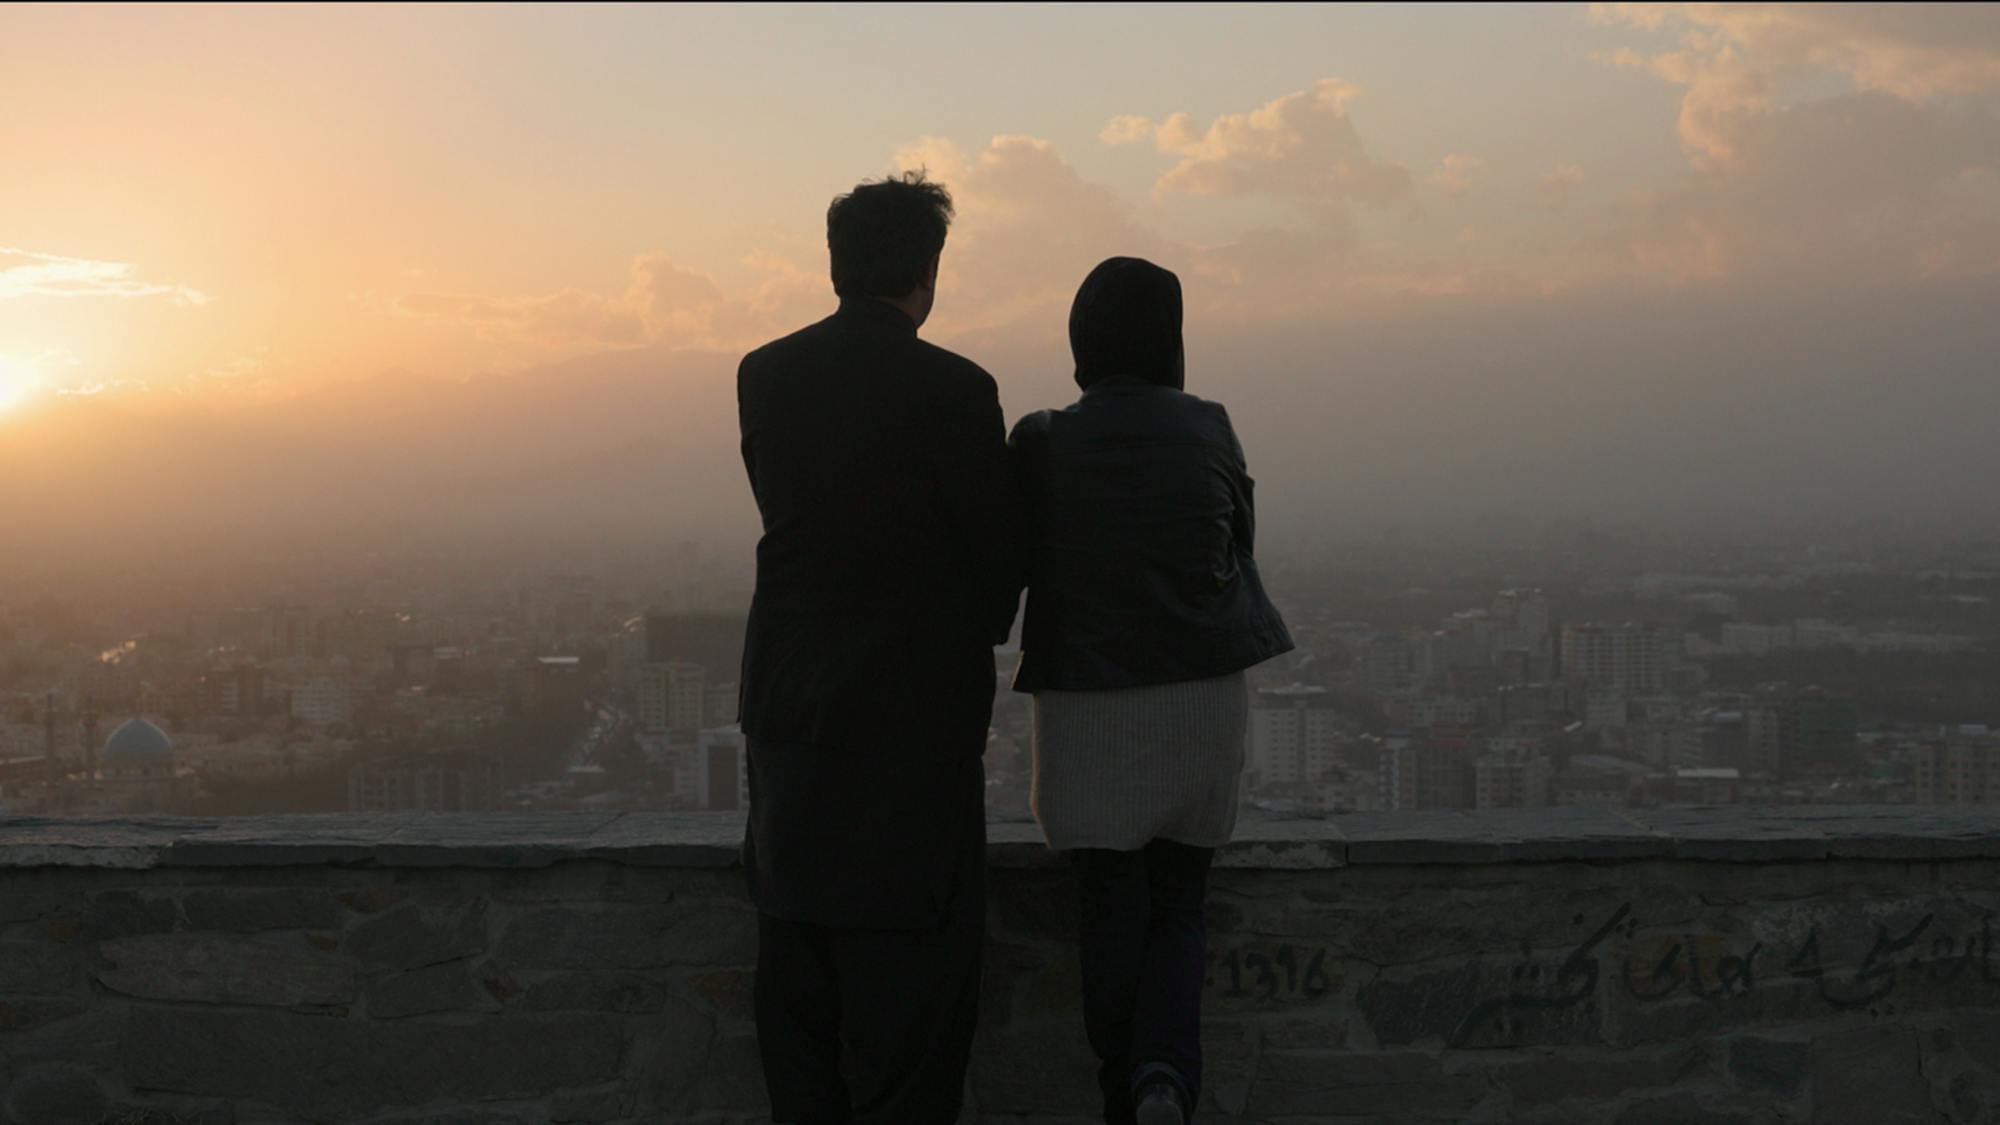 Two people stands on a roof looking out on the city, as the sun rises or sets in the distance.